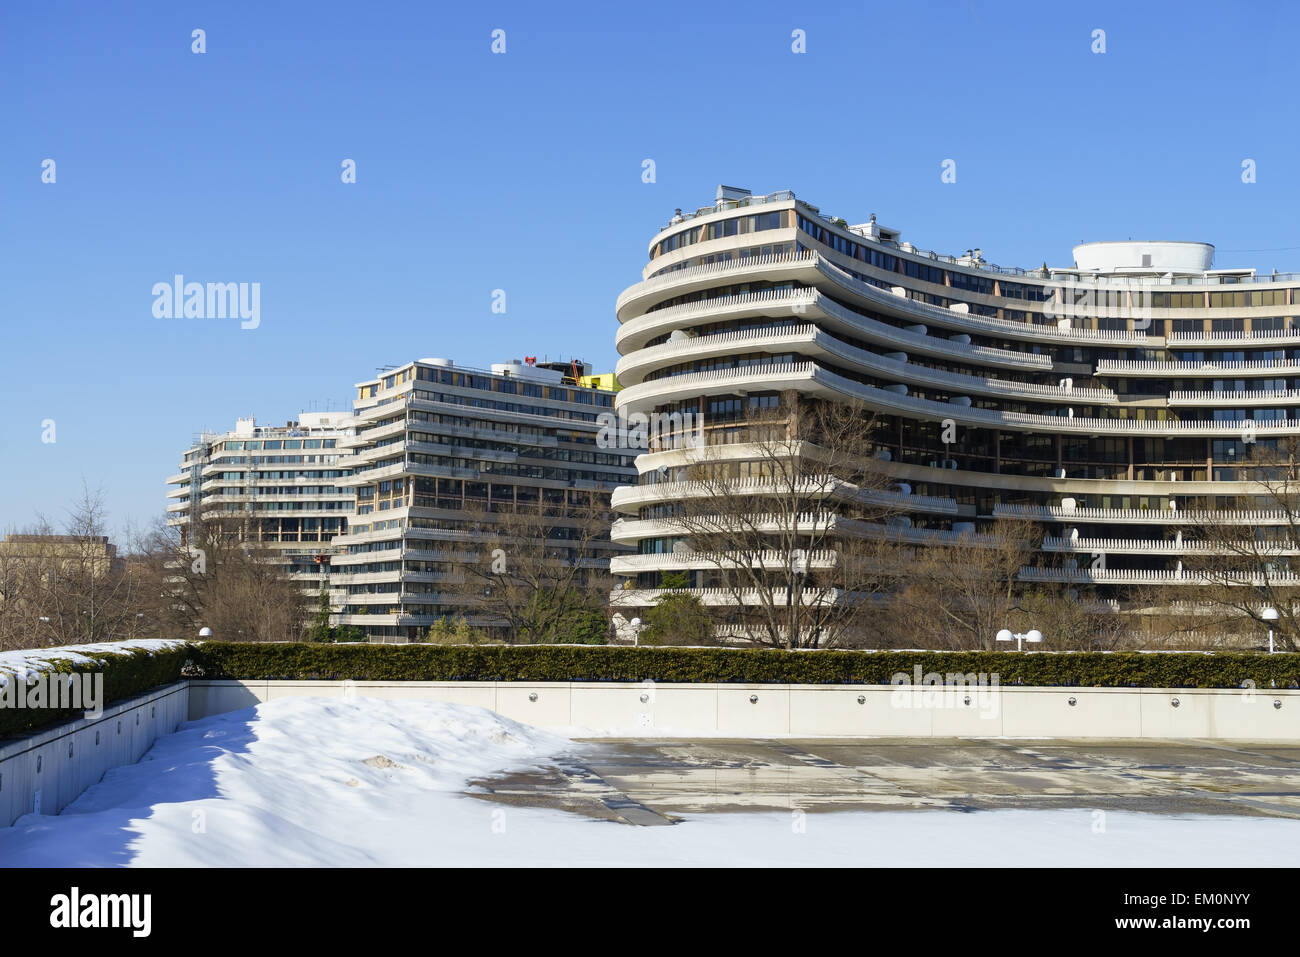 The Watergate complex, apartments and hotel on the banks of the Potomac River, Washington DC USA. Stock Photo